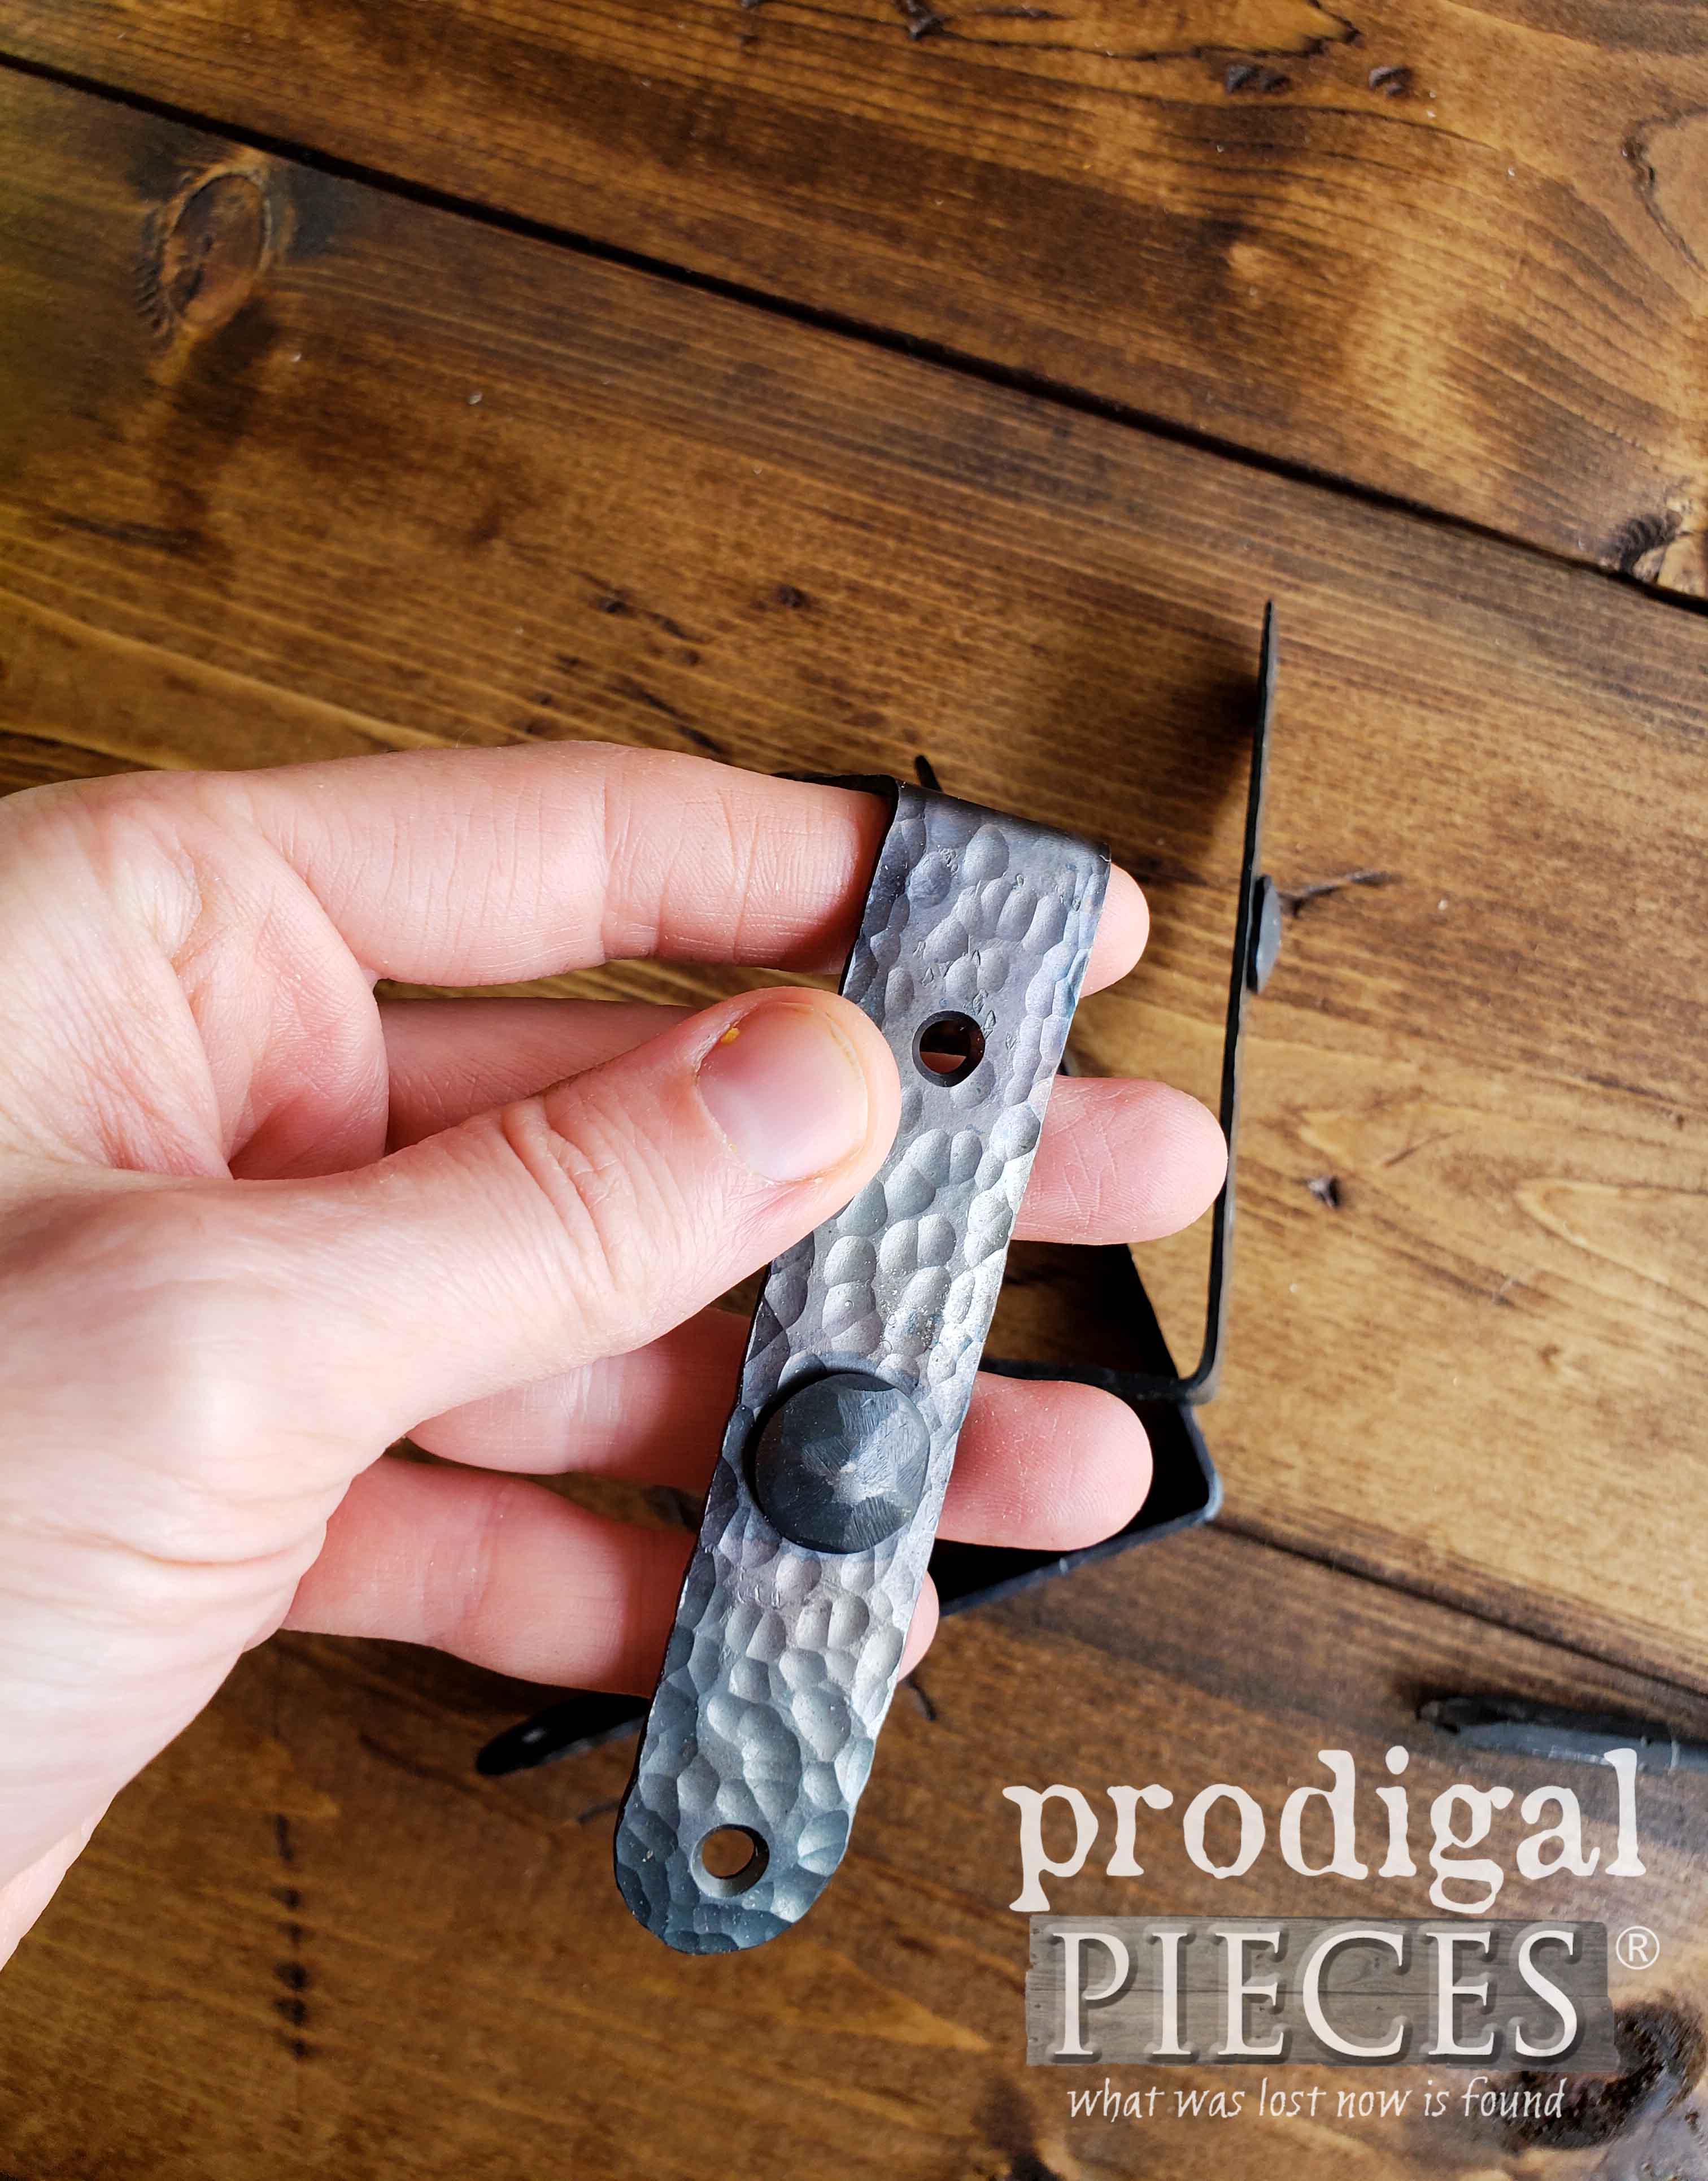 Hand-forged Hammered Iron Hardware for DIY Reclaimed Workbench built by Larissa of Prodigal Pieces | prodigalpieces.com